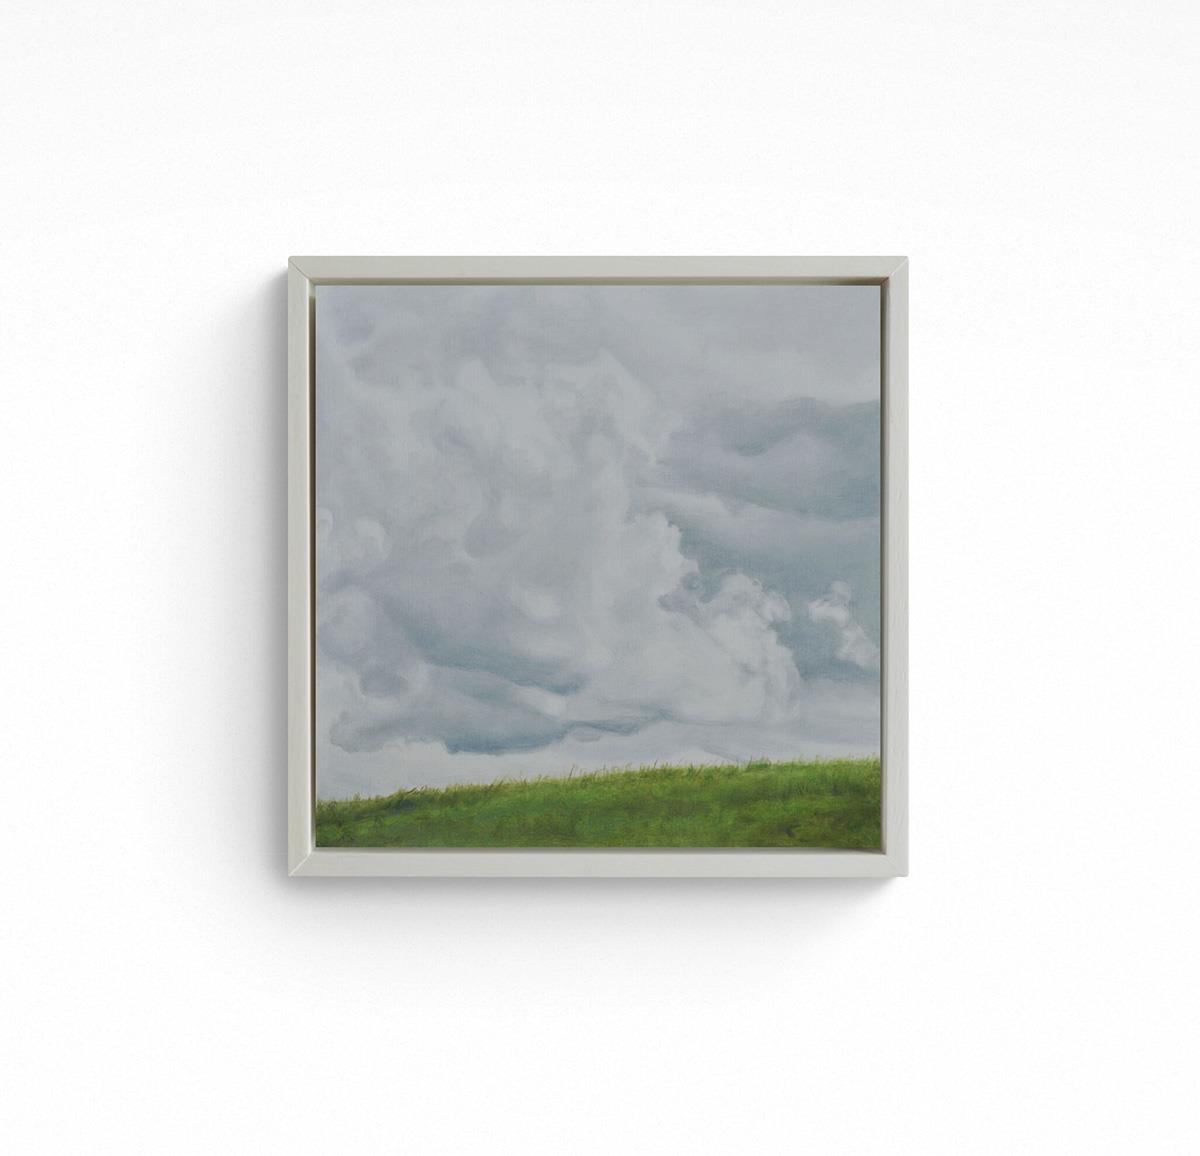 small painting of a sliver of grass on an overcast day